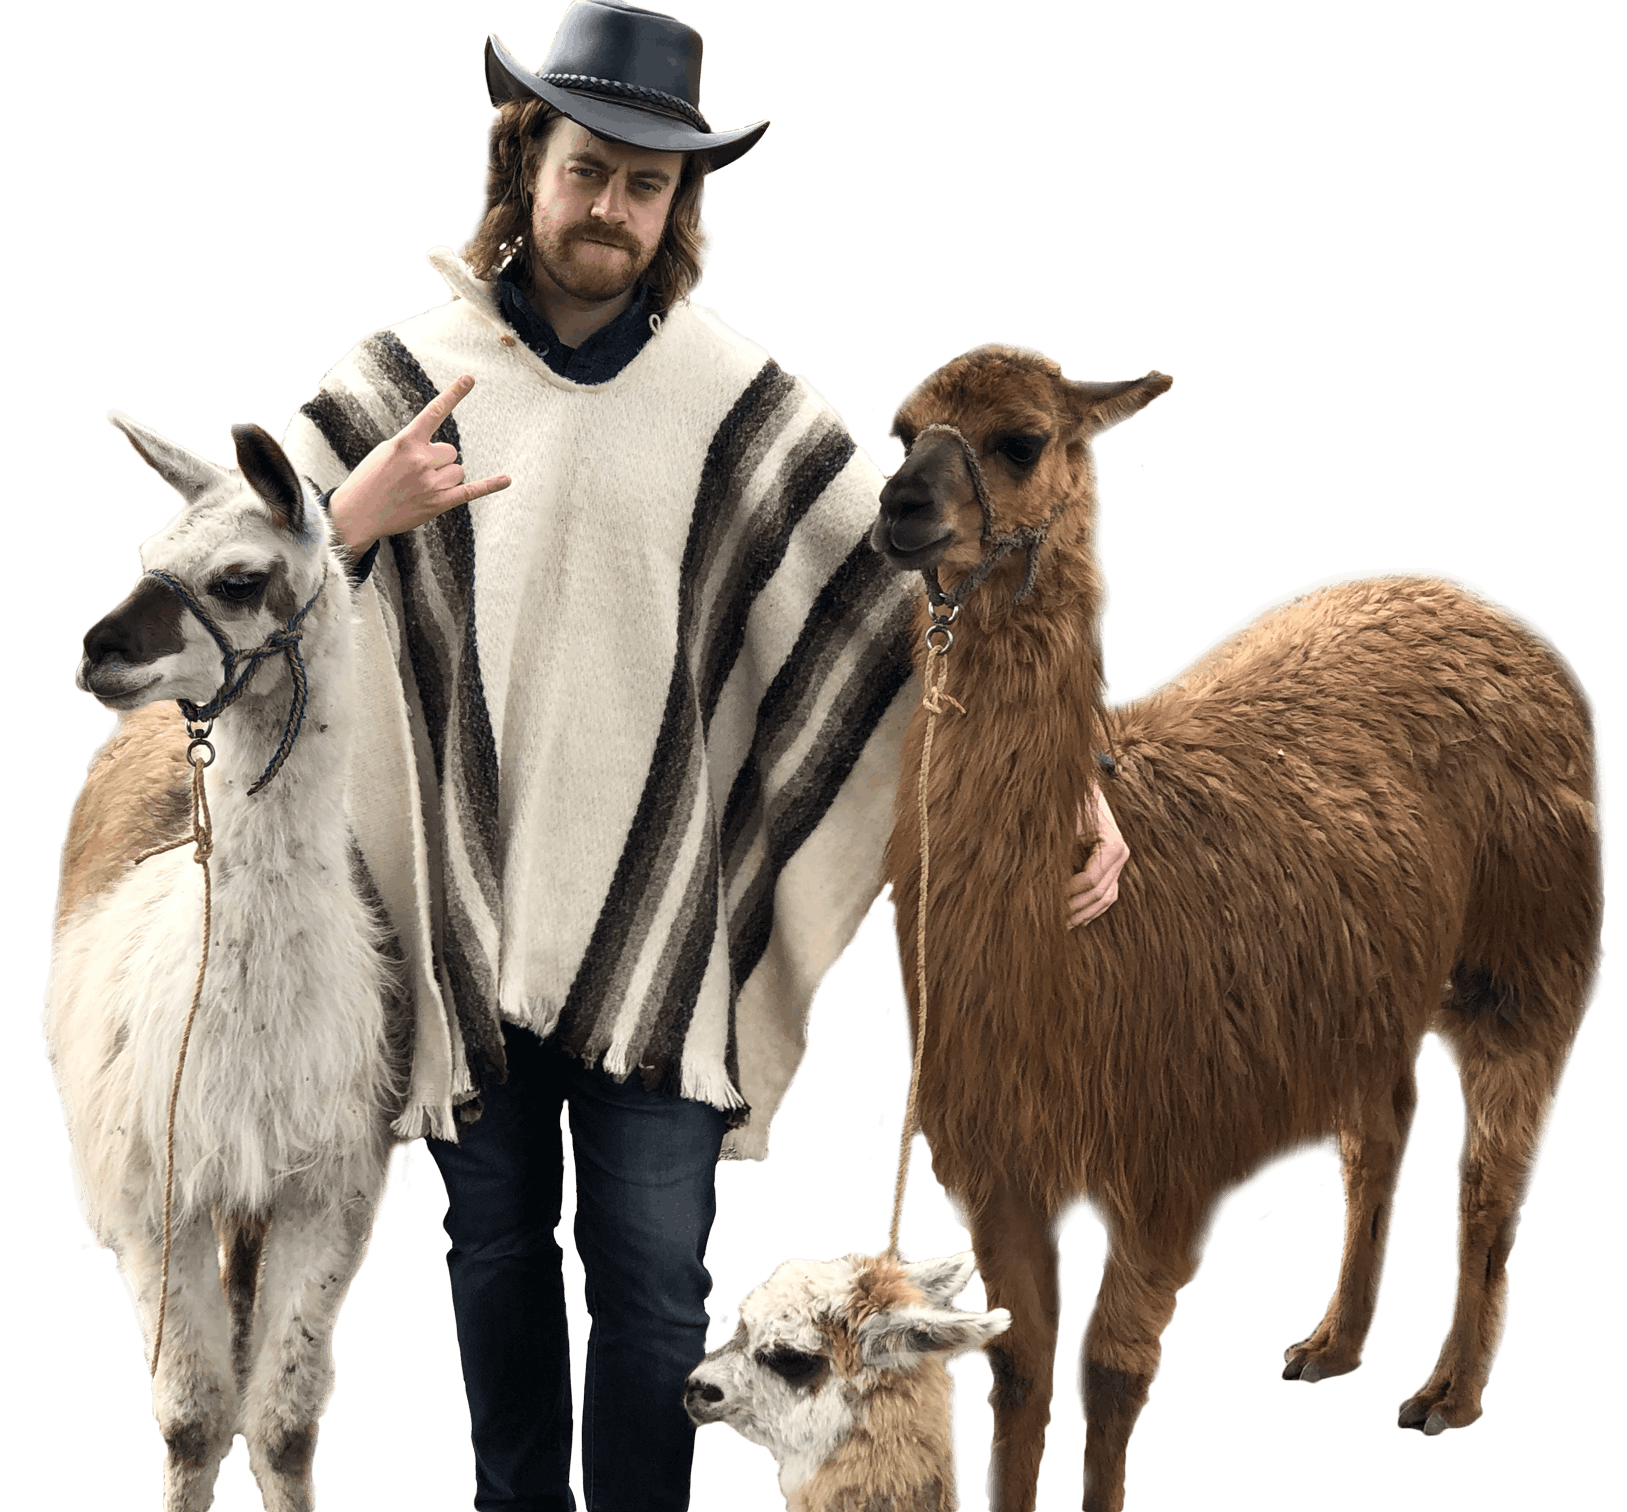 Phill Aelony with his llama friends on the top of Mt. Teleferico outside of Quito, Ecuador. This photo is from January 2020.